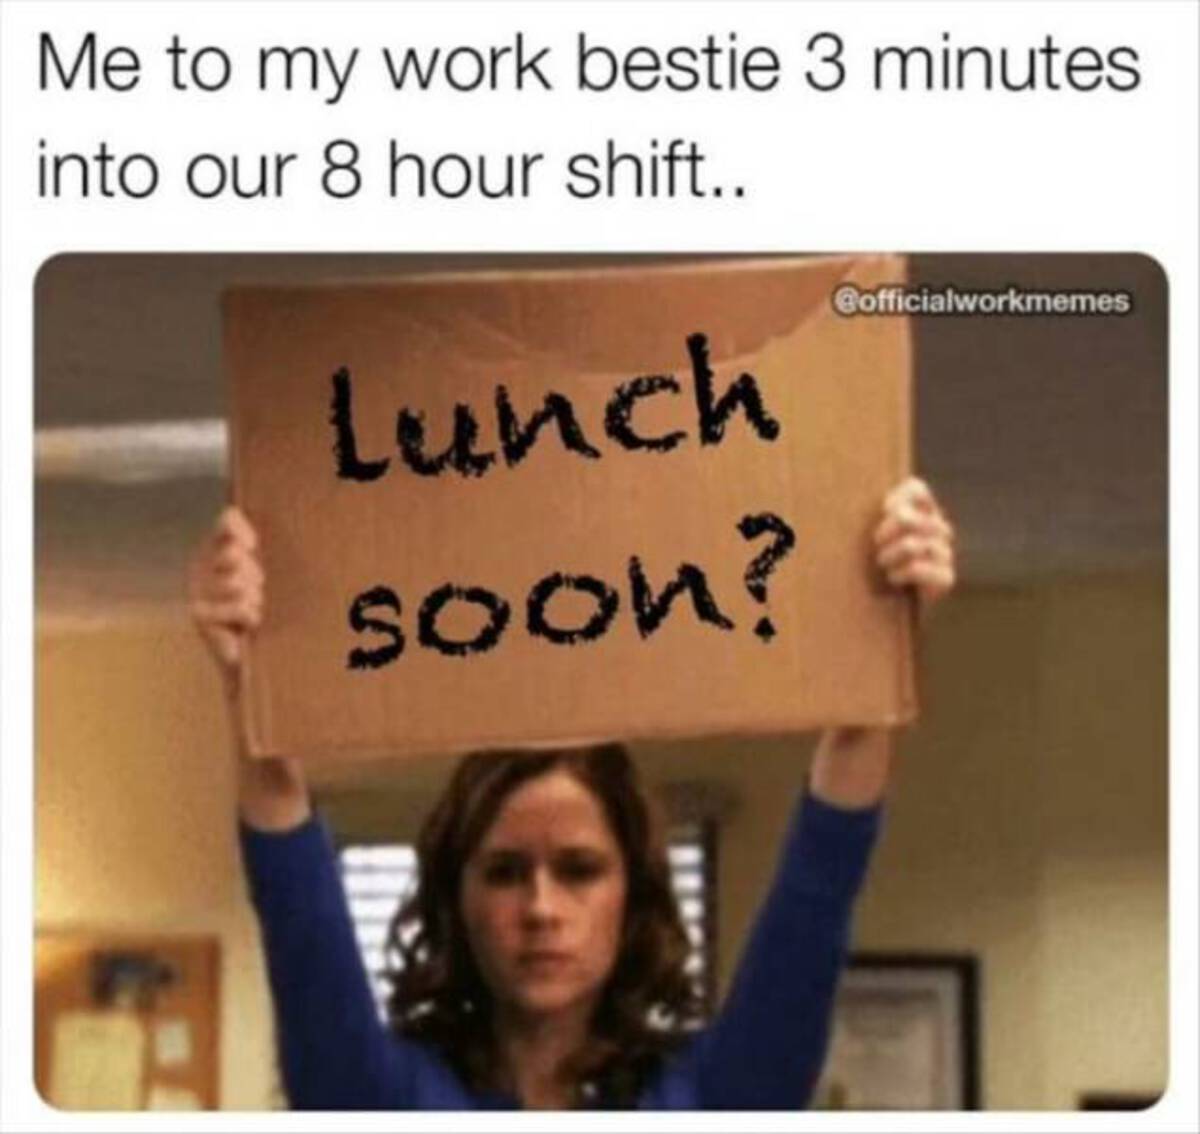 photo caption - Me to my work bestie 3 minutes into our 8 hour shift.. Lunch soon?